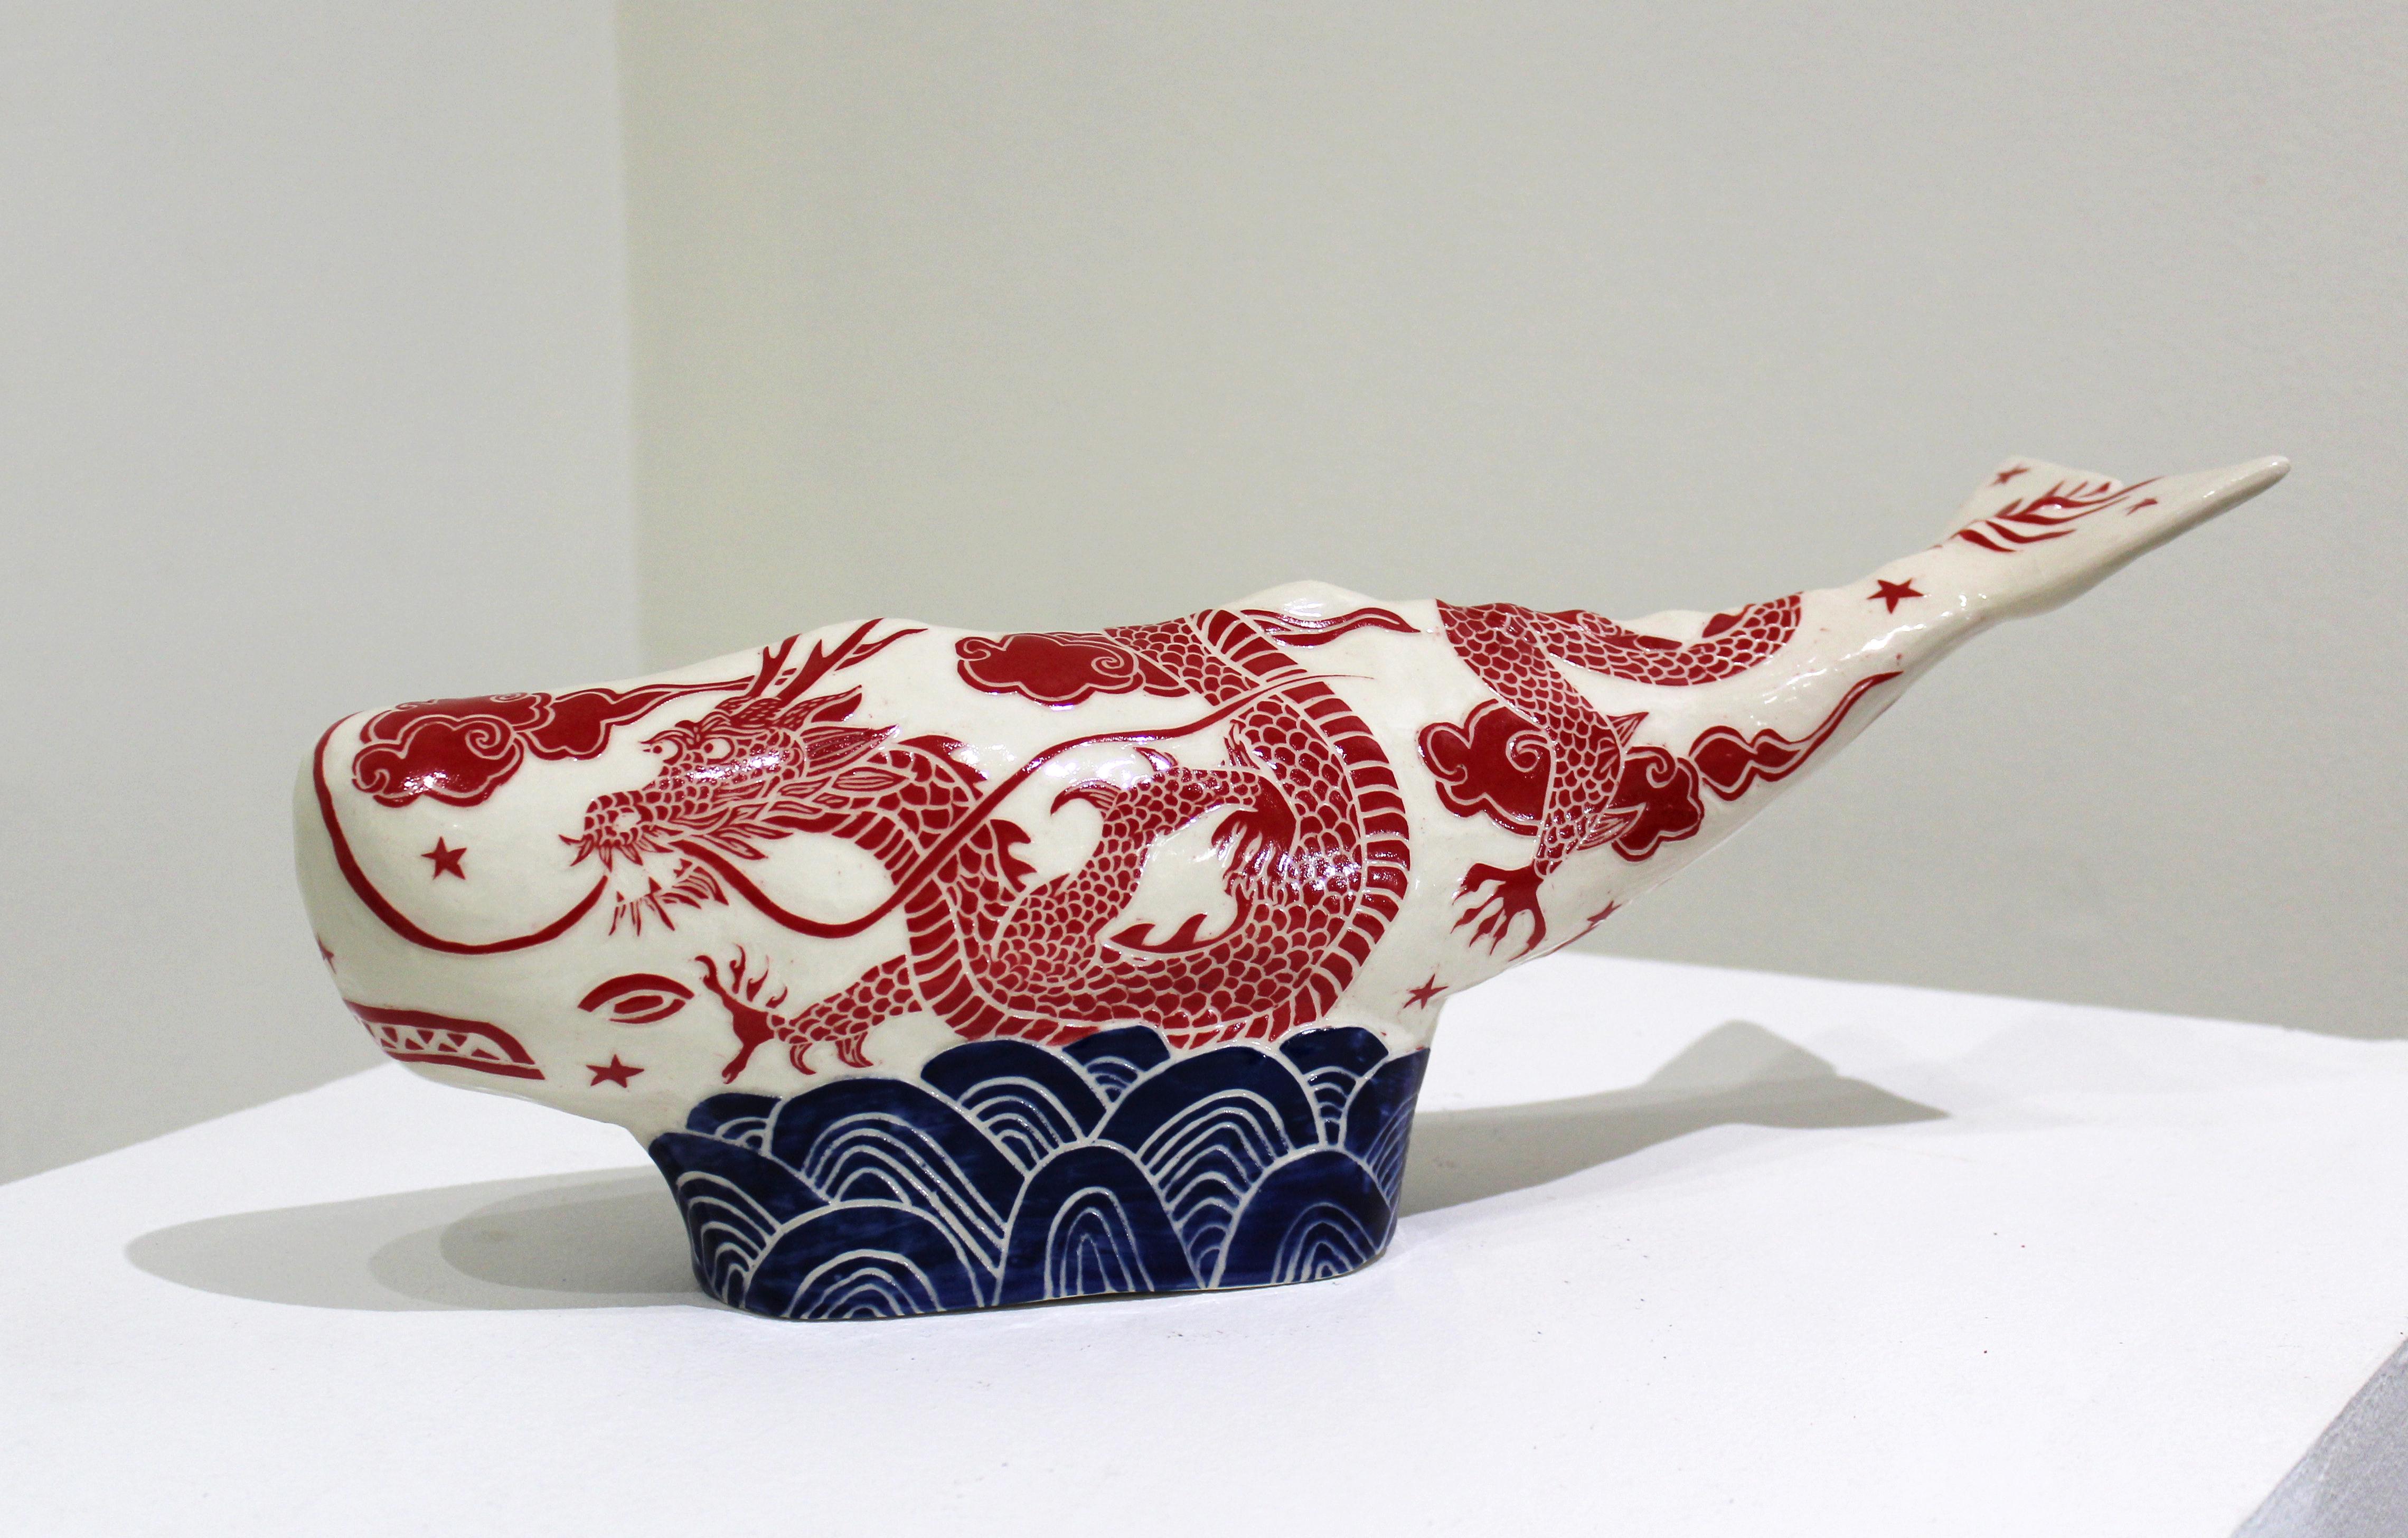 "Whale" with Chinese Dragon, carved sgraffito ceramics, whale sculpture - Sculpture by Abbey Kuhe